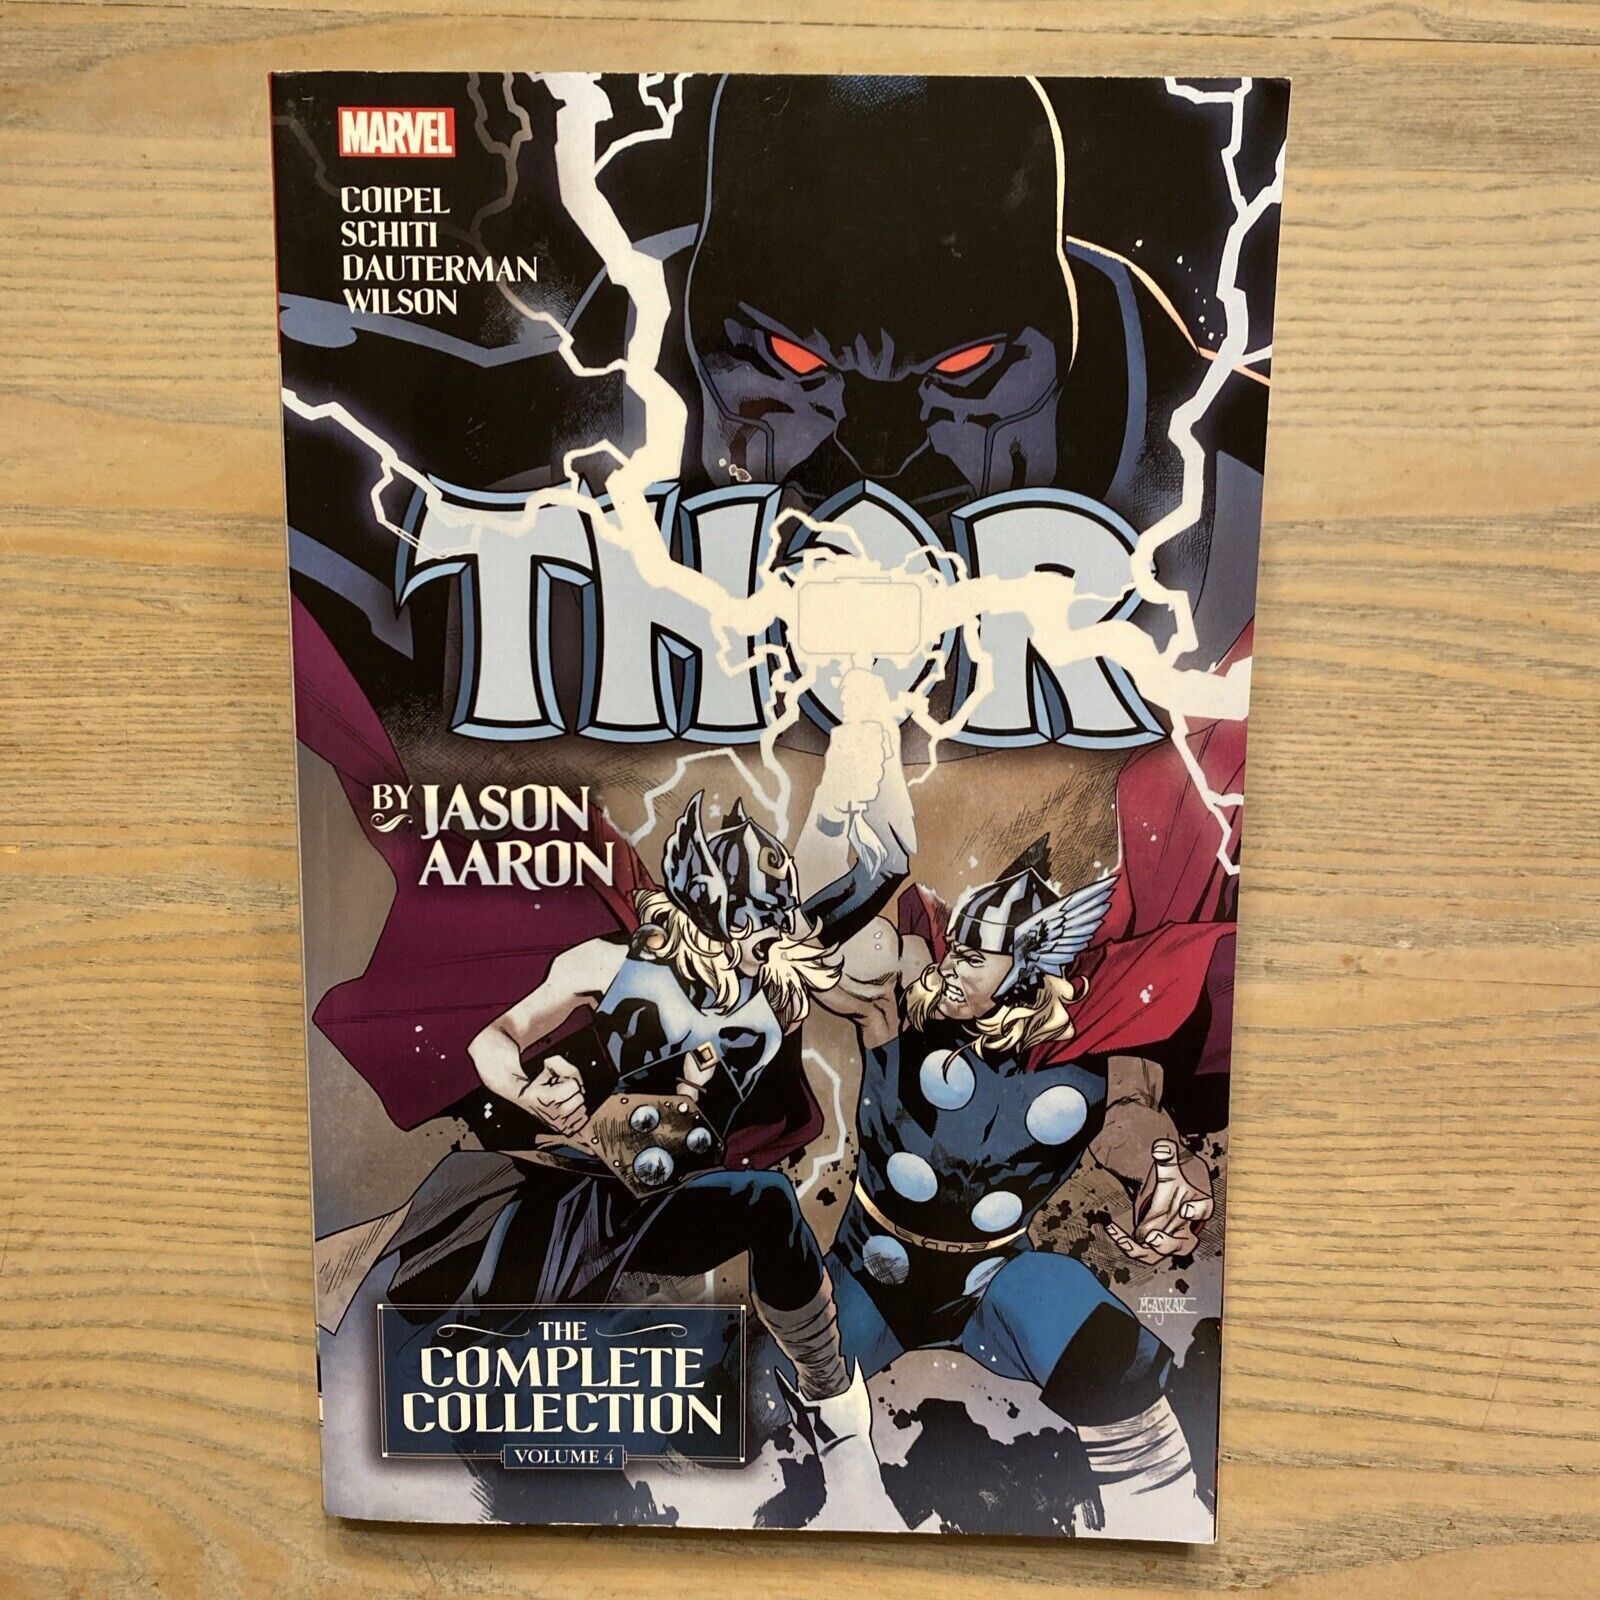 Thor by Jason Aaron: the Complete Collection Vol. 4 Paperback Marvel MCU